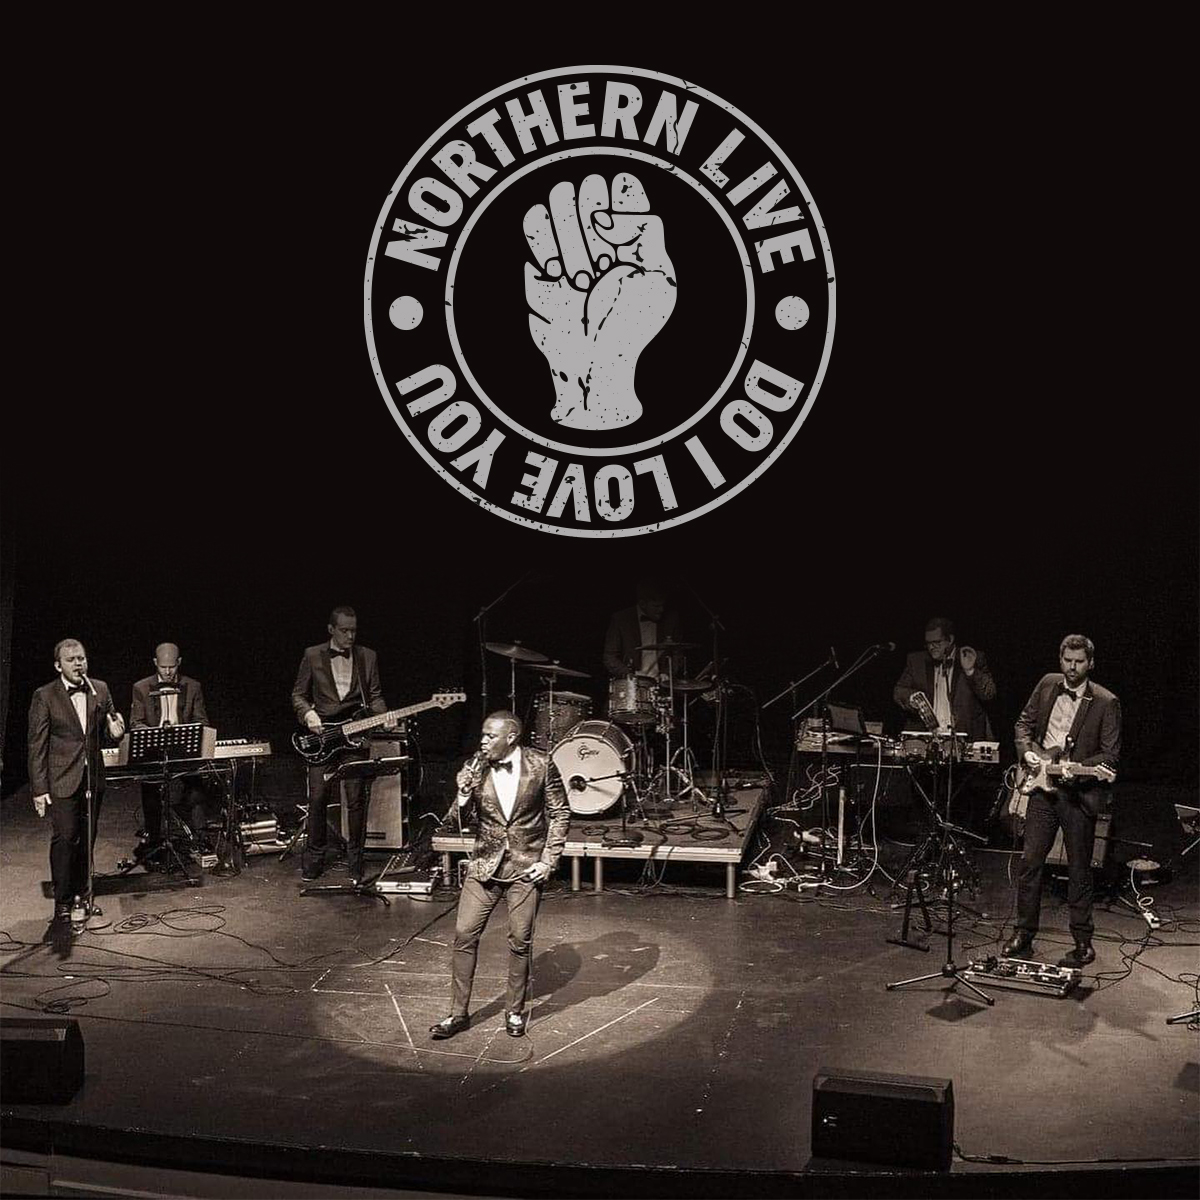 📣 NEWS: Northern Live – Do I Love You, is the ultimate Northern Soul live band experience that's coming to the Adelphi Theatre this November! 🎟️ Tickets are on sale now, get them here: lwtheatres.co.uk/whats-on/north…